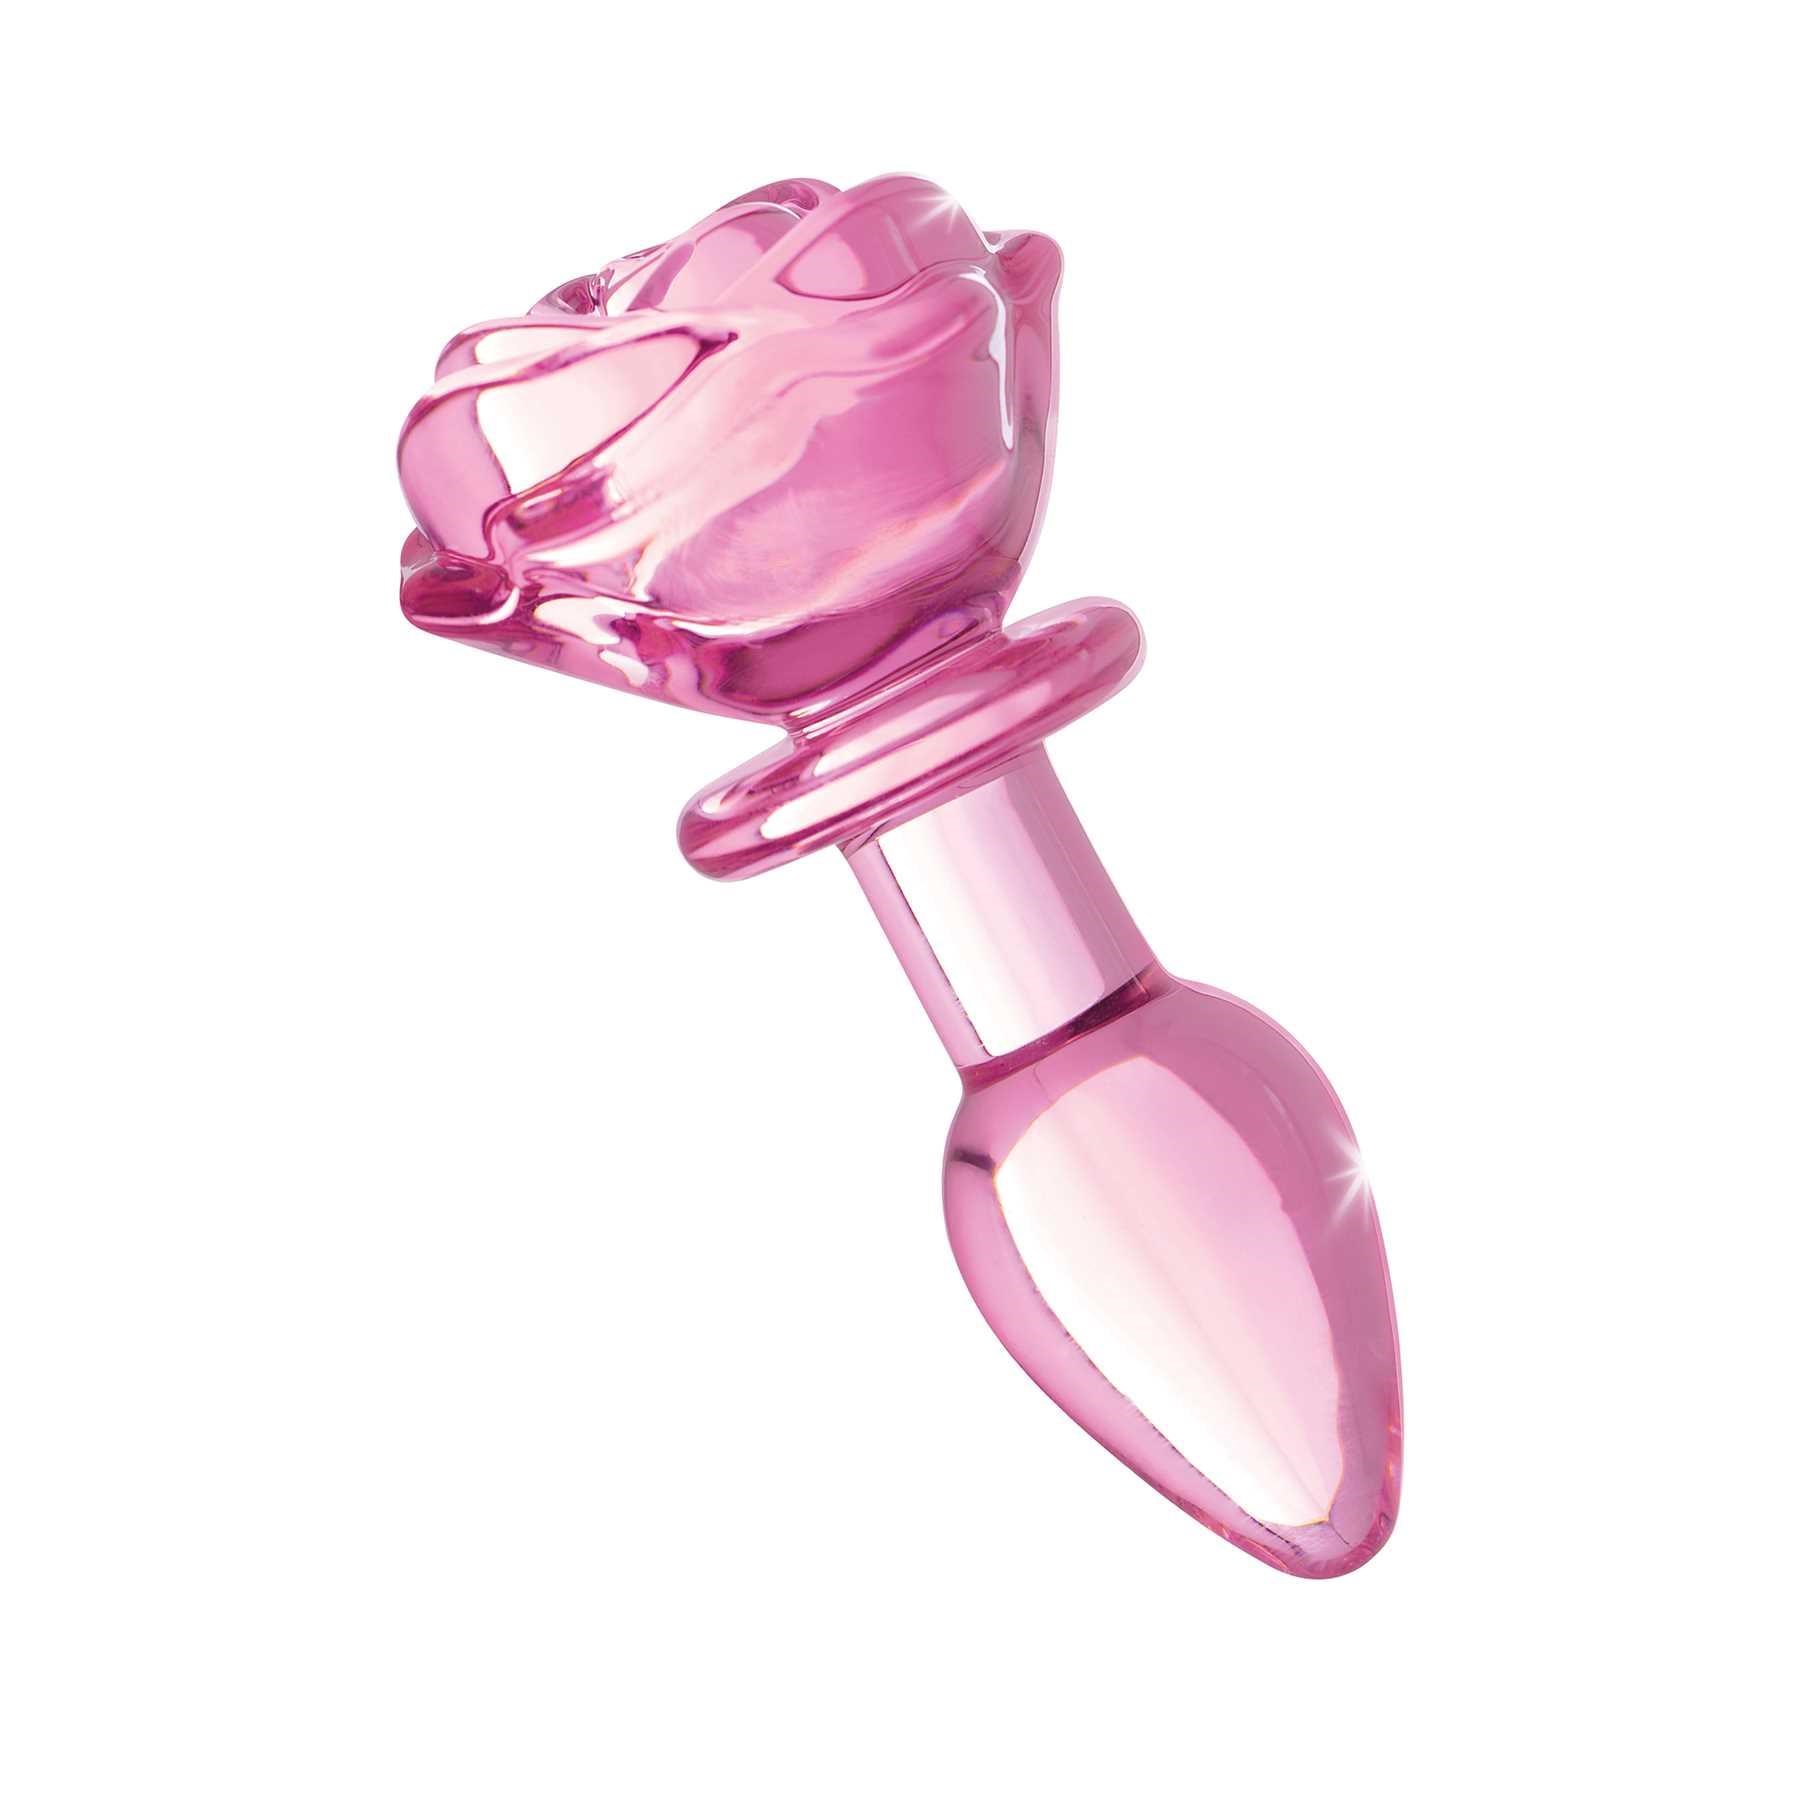 Booty Sparks Pink Rose Glass Anal Plug side view
